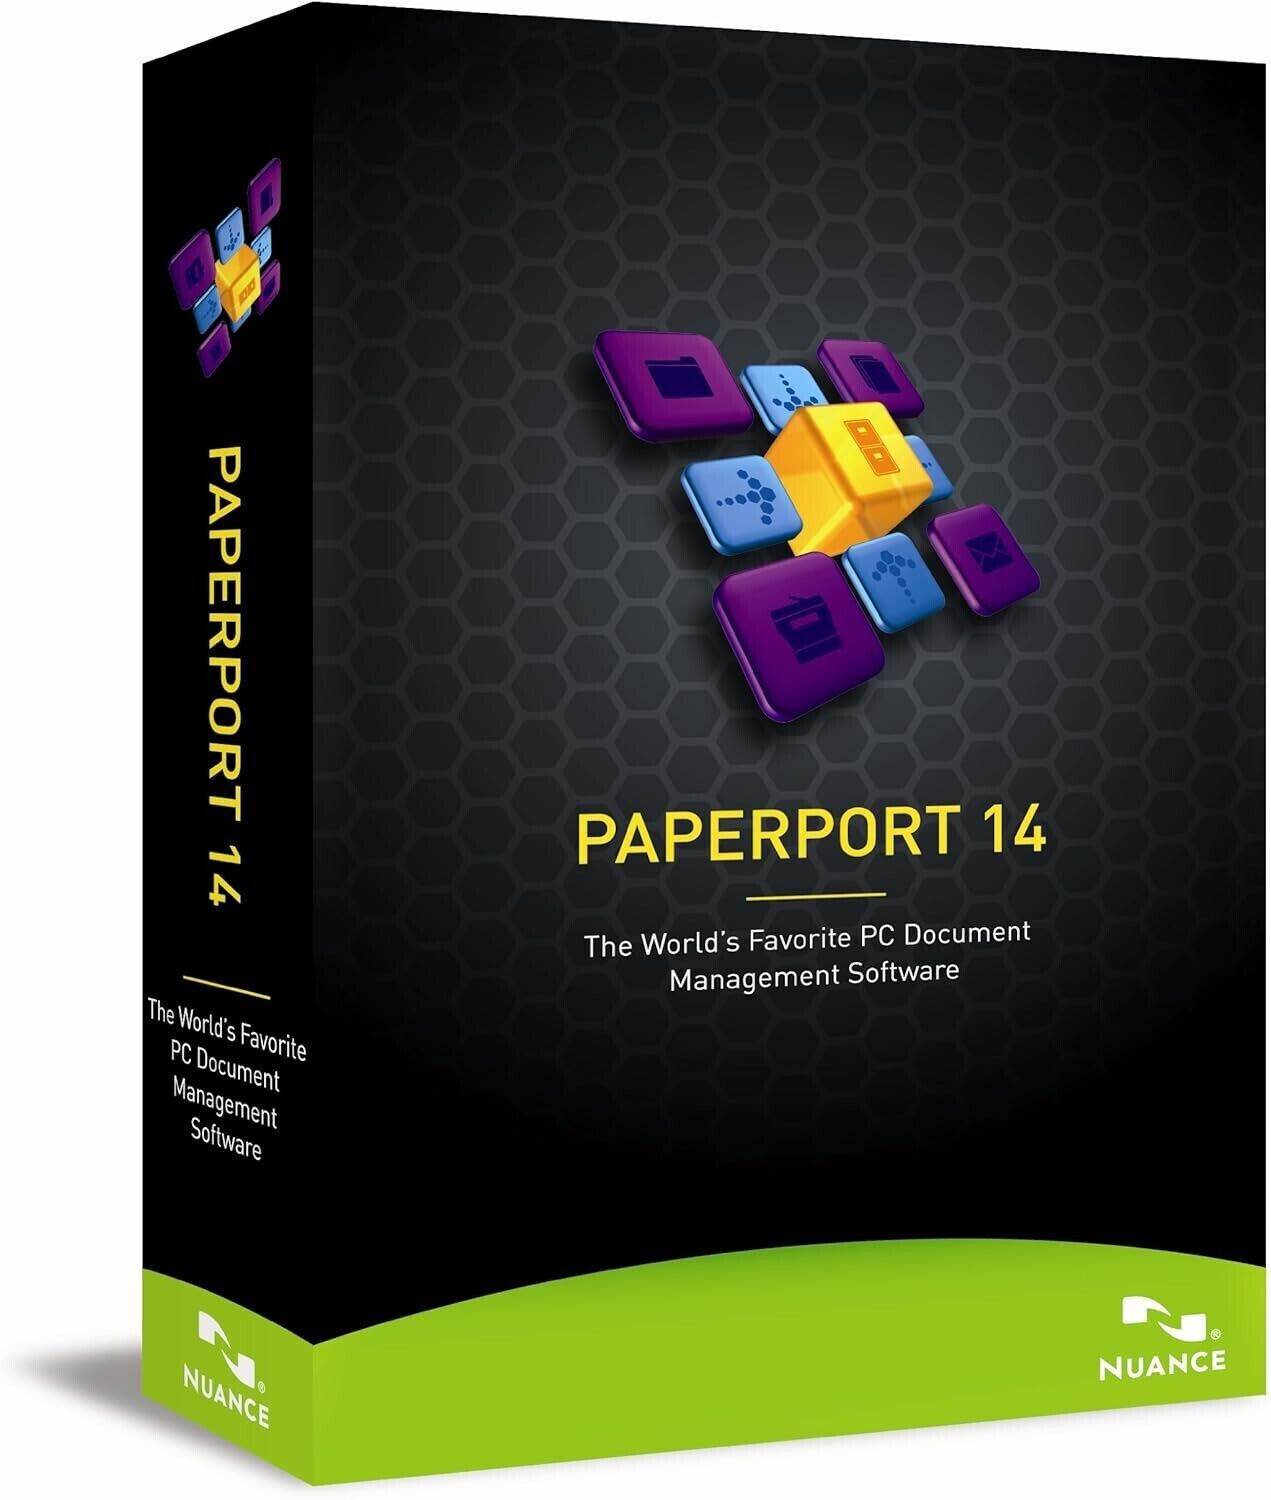 PaperPort 14 for Windows